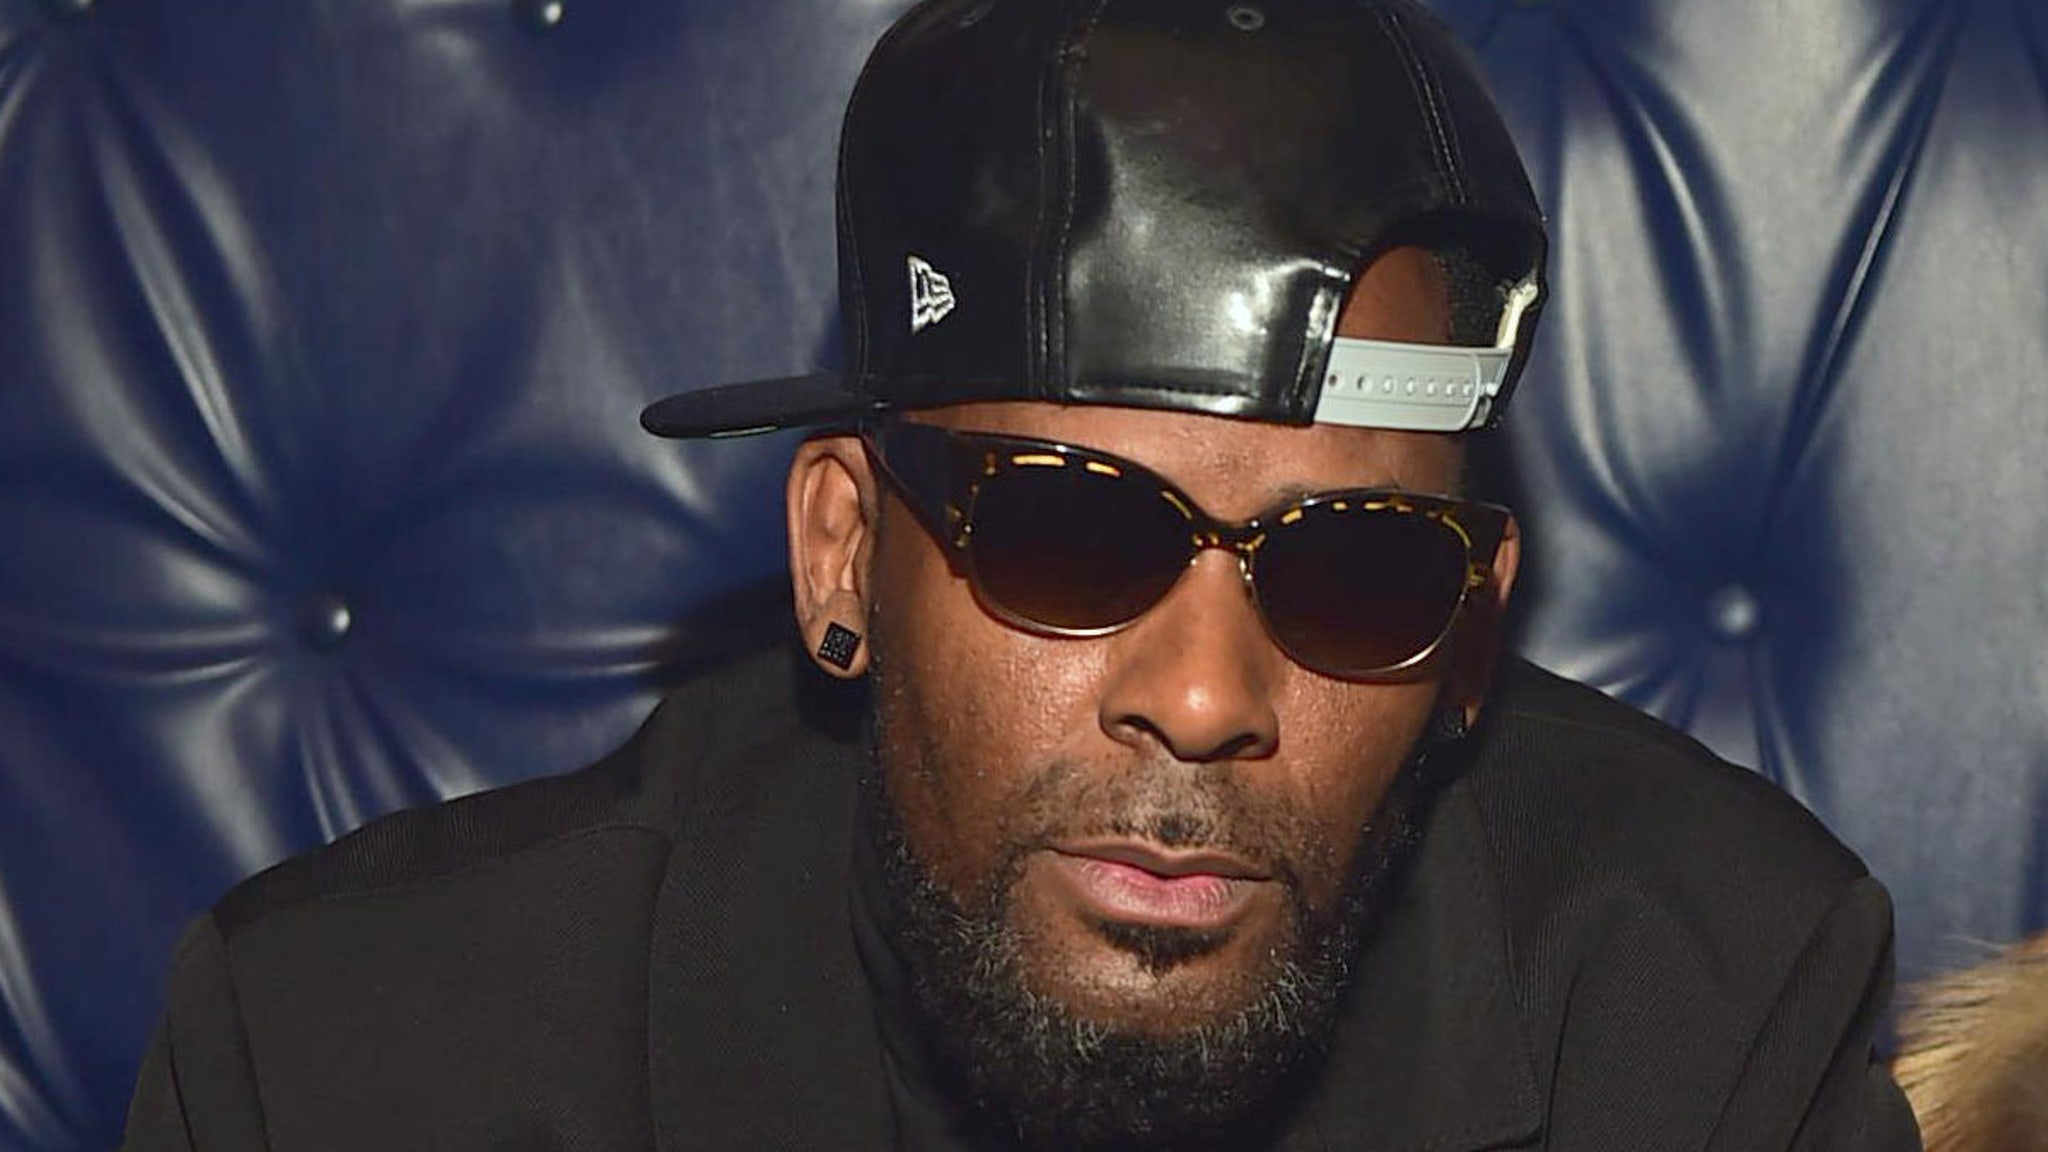 R. Kelly Found Guilty On All Counts in Federal Sex Crimes Trial